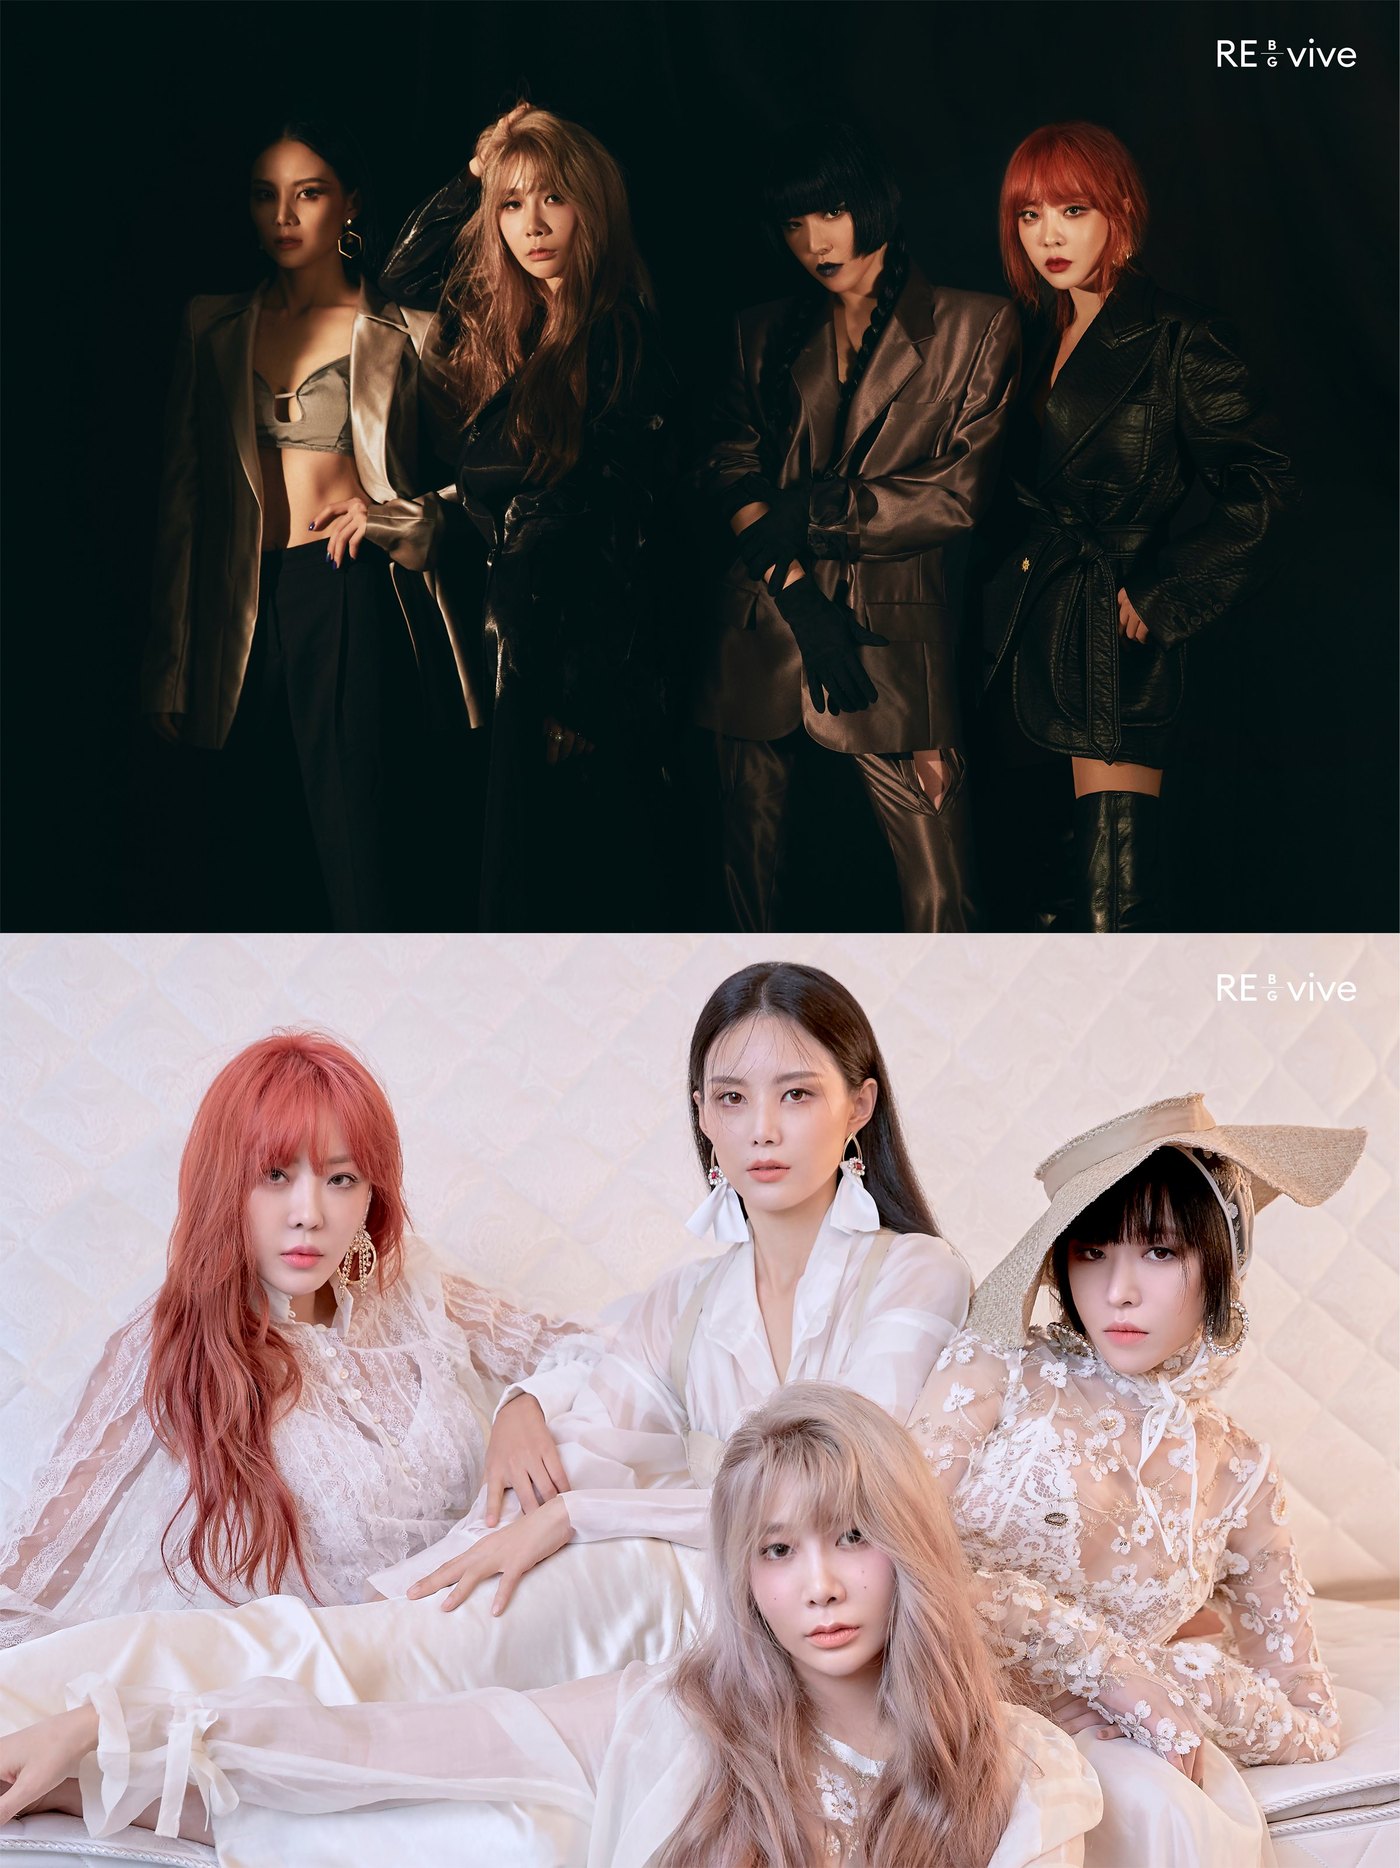 On the official SNS channel, VAGAL released a new album RE_vive (Revival) official photo and announced a full comeback countdown.In the two photos released, the girl showed the charm of the girl crush. The restrained expression and pose alone showed an overwhelming presence.In the contradictory concept of Black and White, the V-Girl caught the attention with more visual and personality styling.In the black mood, it showed intense charisma, and in the white mood, it showed alluring charisma and raised expectations for comeback.With the recent re-examination of famous songs through Mnet Queendom, VAGAL has been receiving a hot response online such as YouTube, and interest in new albums for four years is also growing.The new album RE_vive will be released on each music site at 6 pm on the 28th, and the news of the new album will be released sequentially through the official SNS.